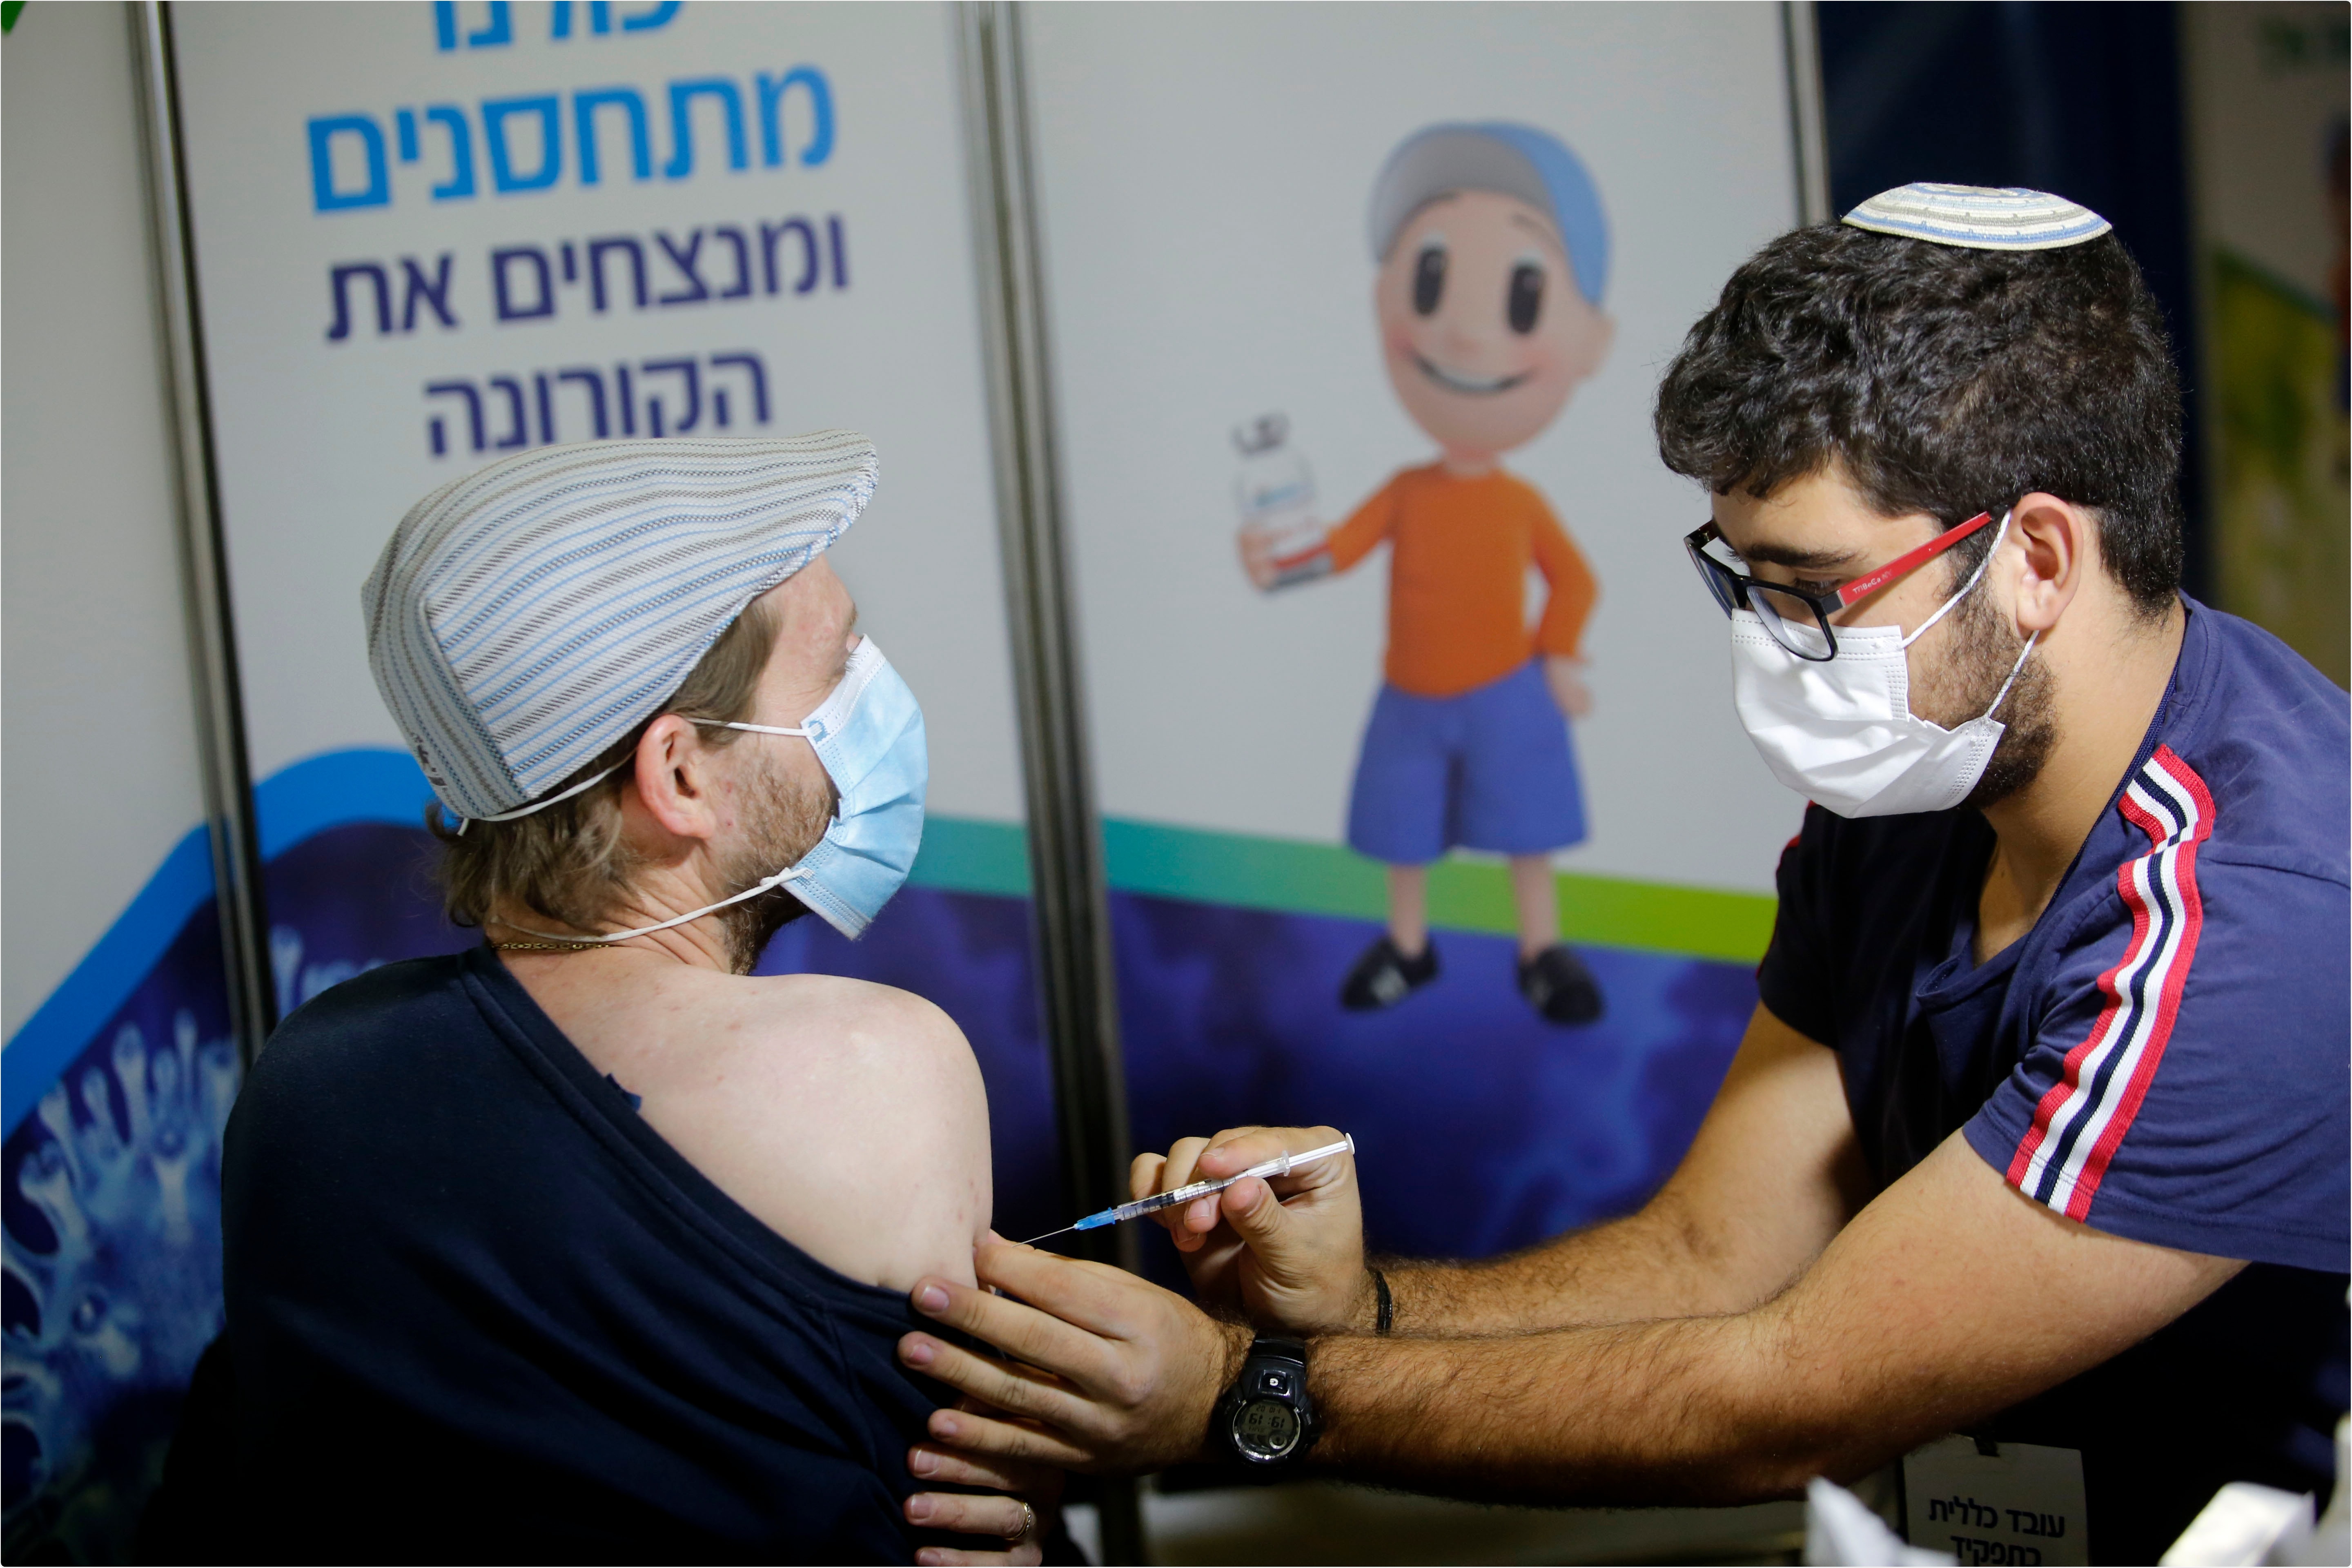 Study: How many lives do COVID vaccines save? Evidence from Israel. Image Credit: Gil Cohen Magen / Shutterstock